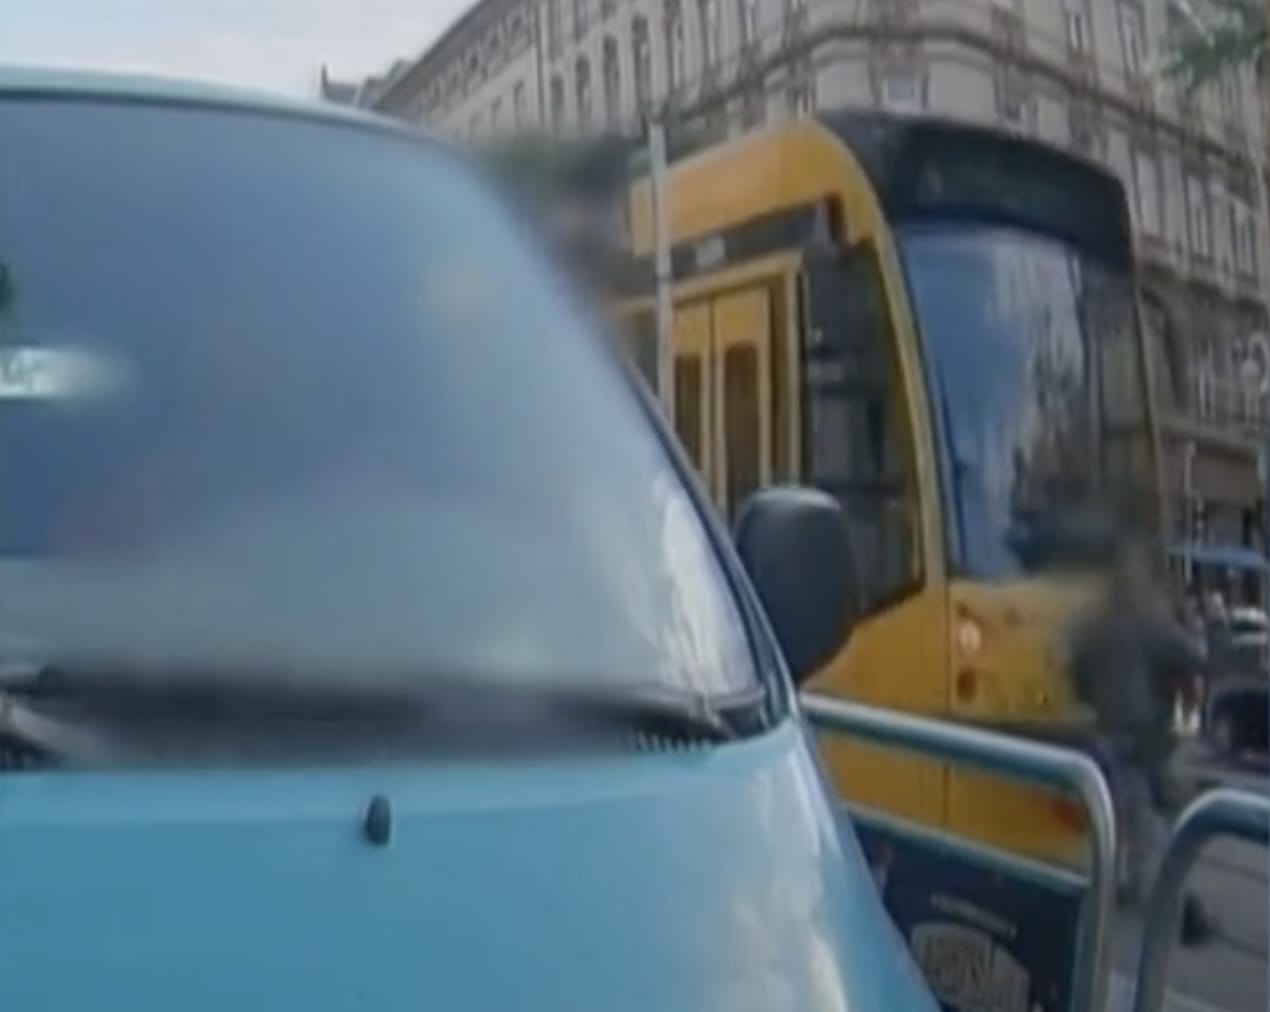 Reckless pedestrian sent flying meters after being hit by tram in Budapest